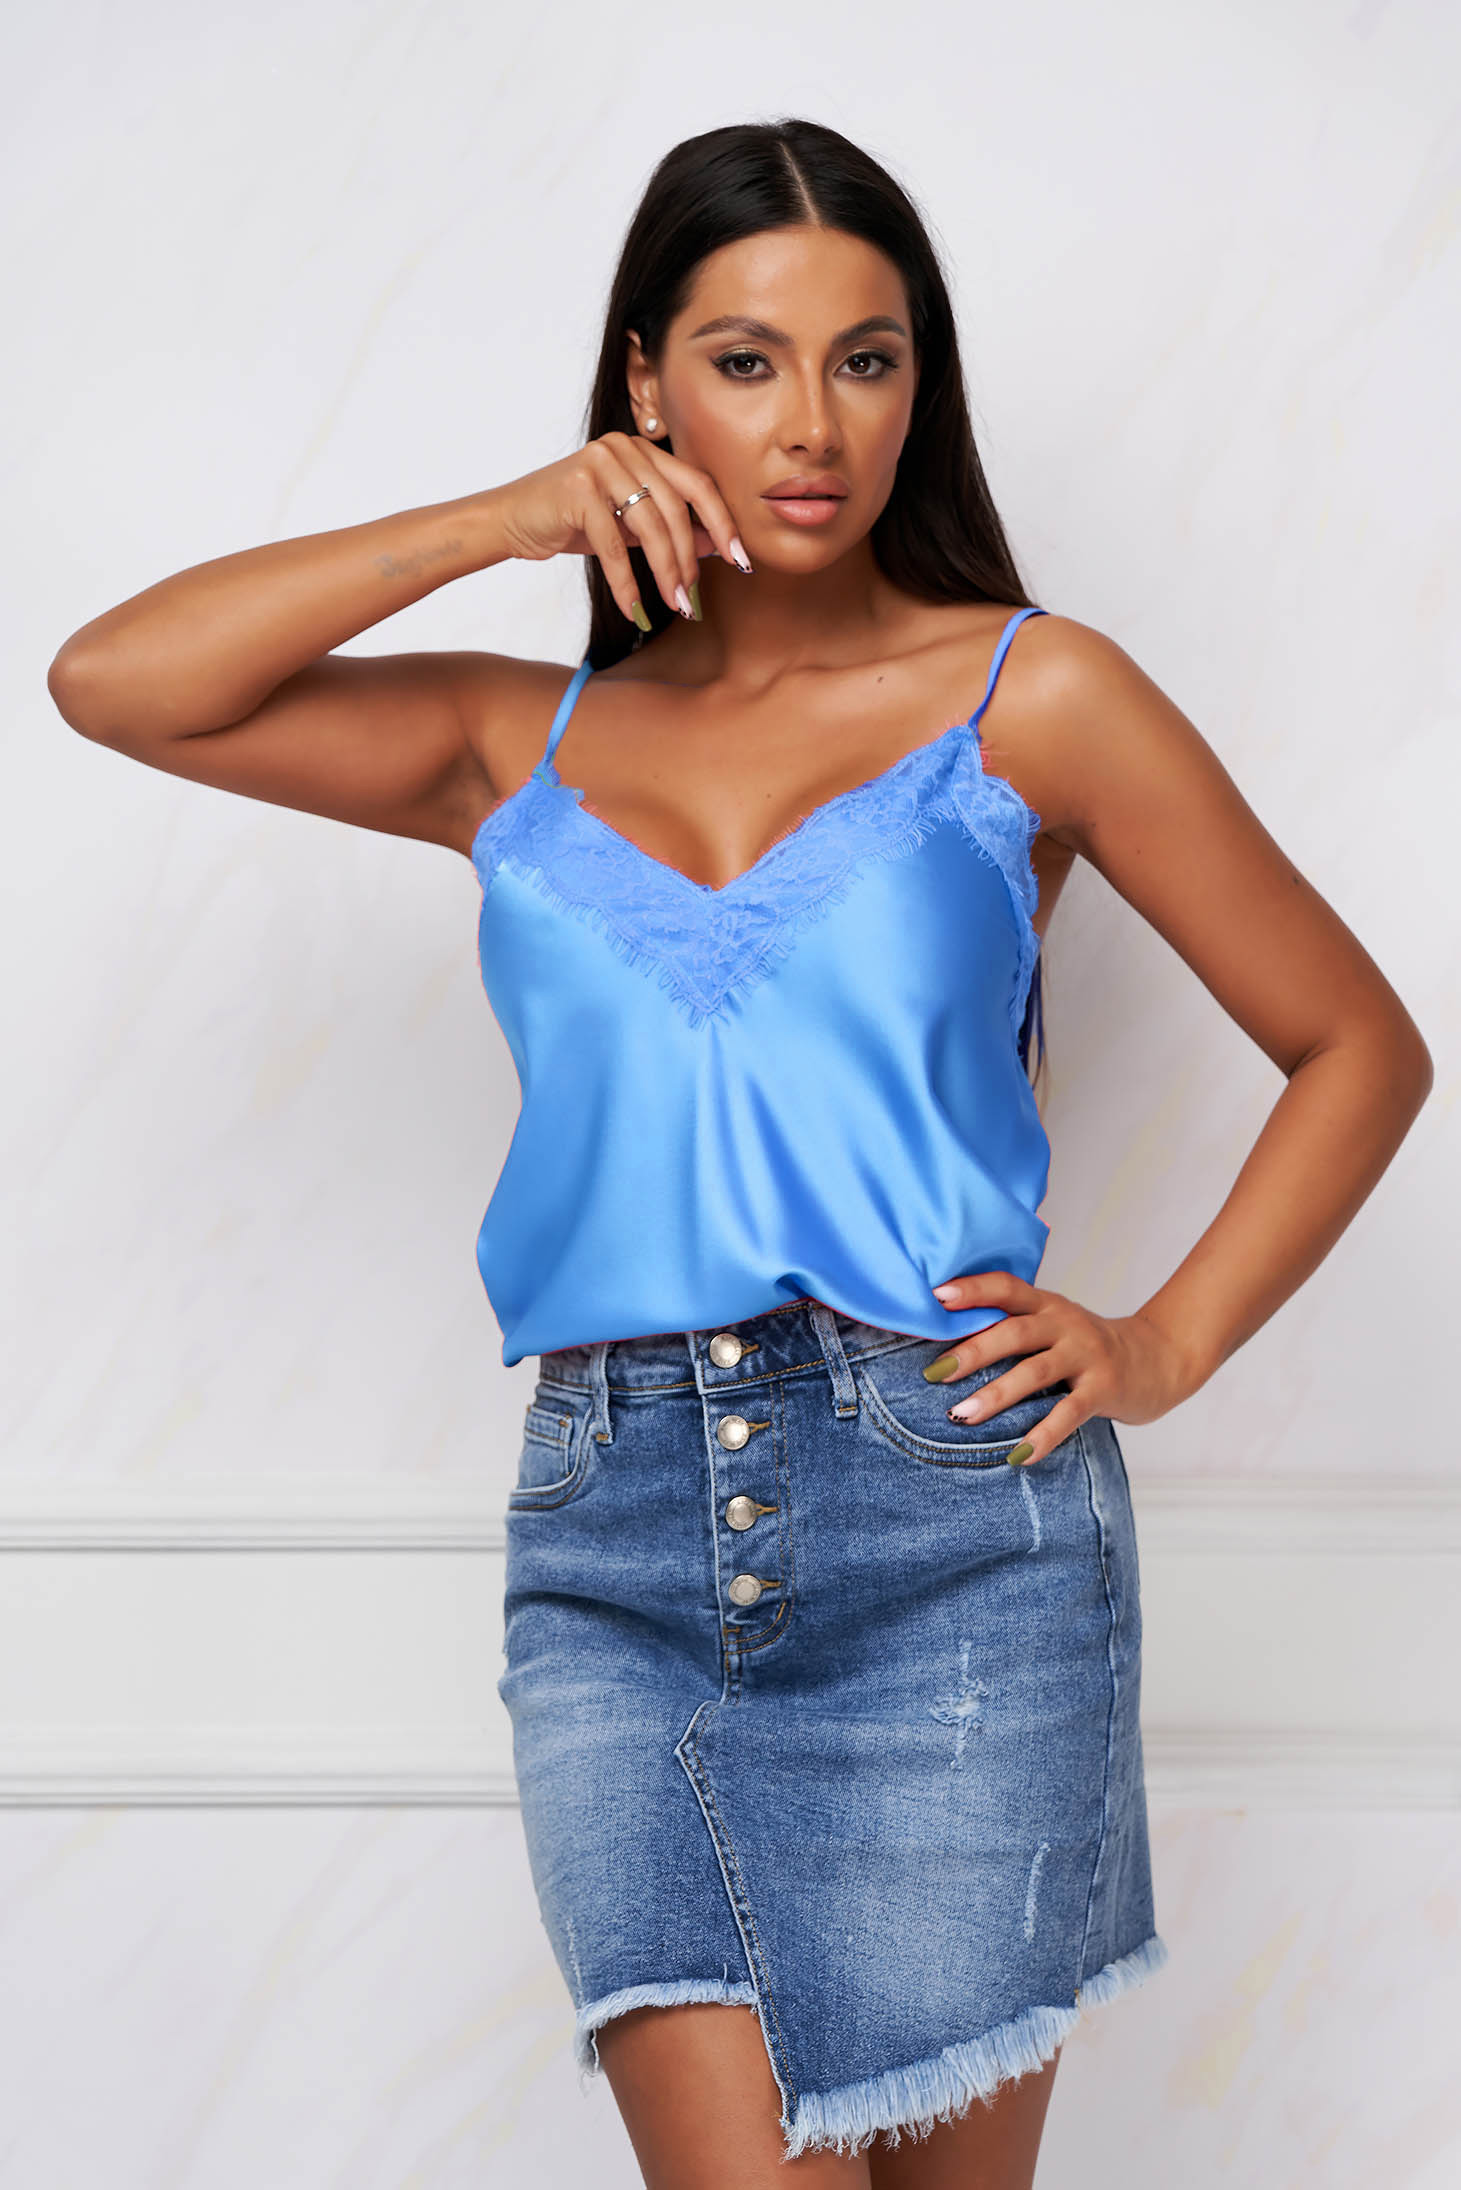 Lightblue top shirt from satin loose fit with lace details